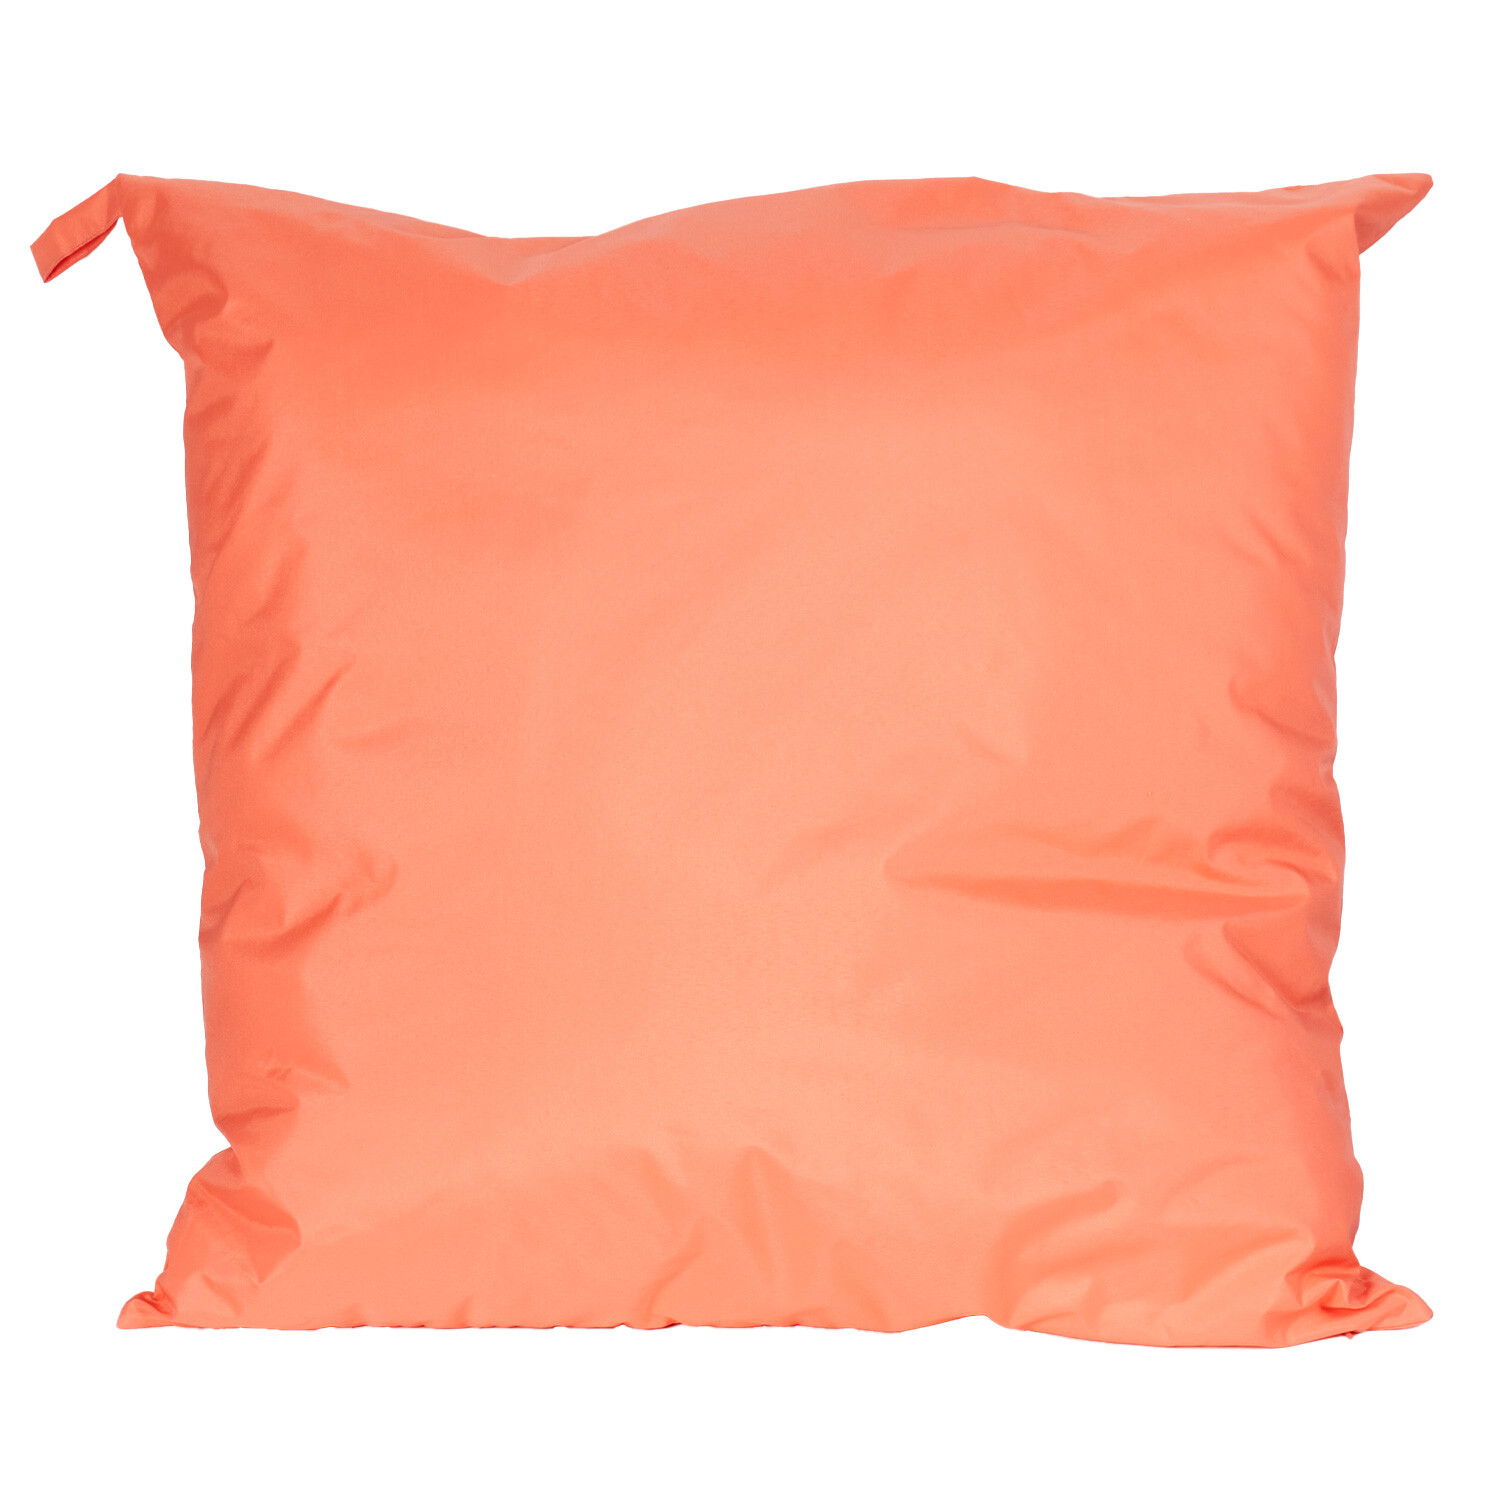 Outdoor Floor Cushion - Coral Image 1